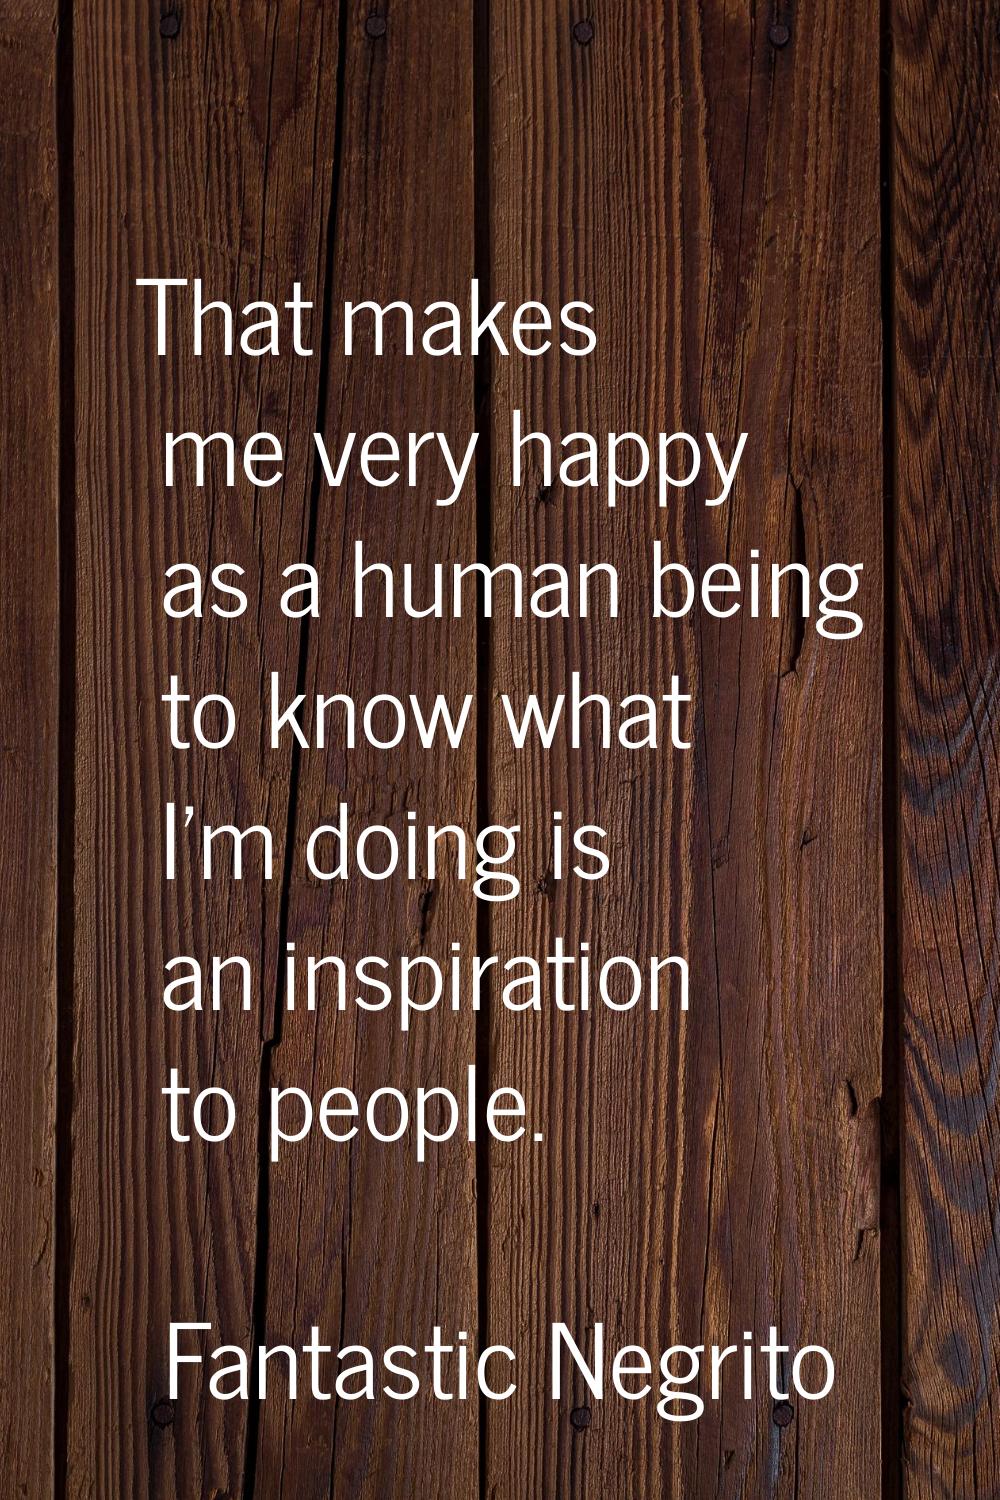 That makes me very happy as a human being to know what I'm doing is an inspiration to people.